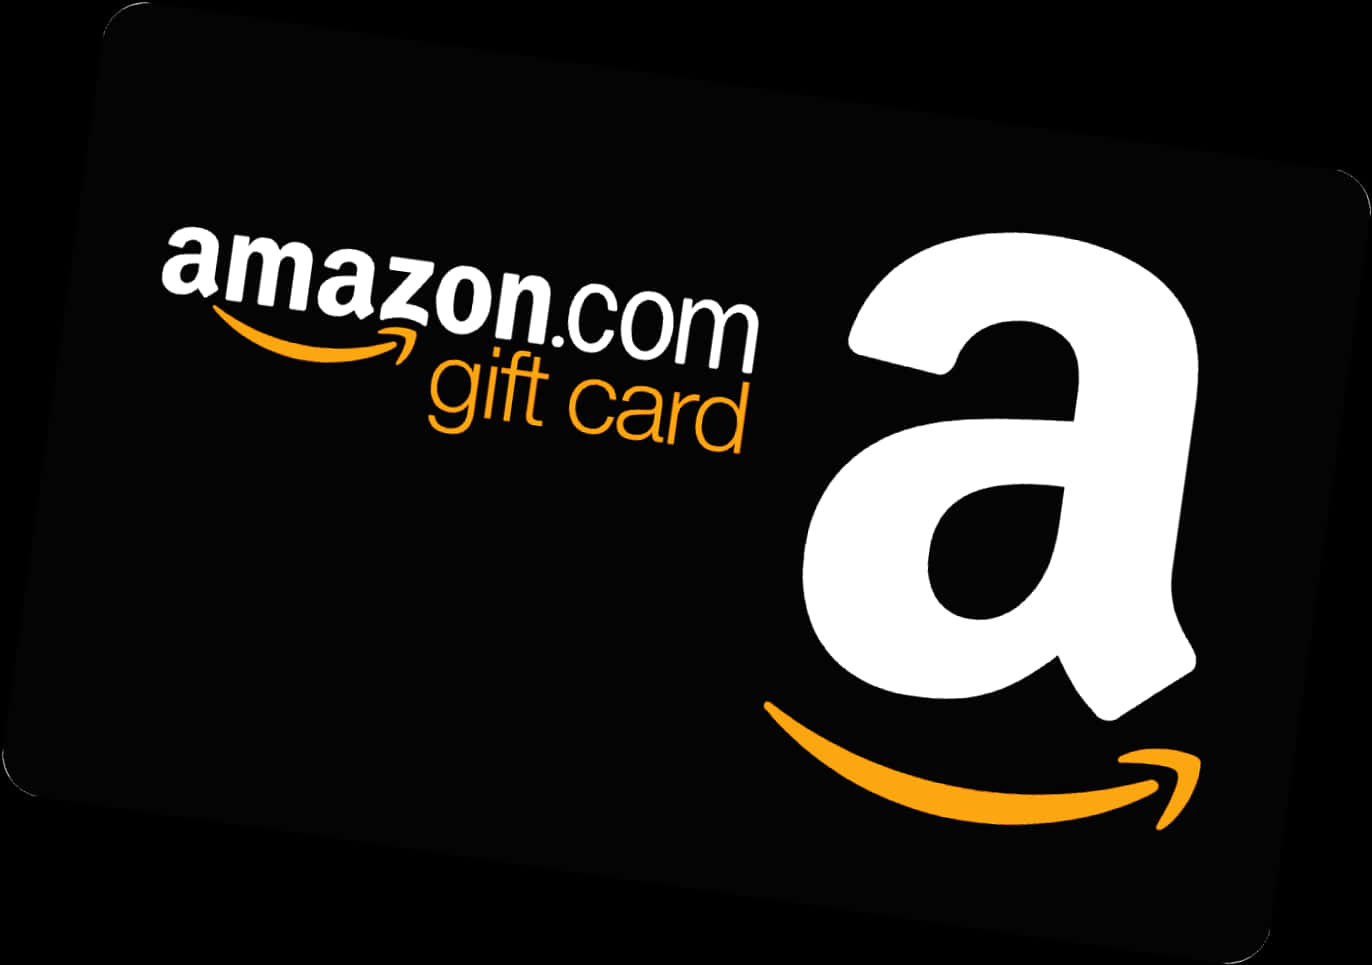 A Black And White Gift Card With White Letters And A Logo